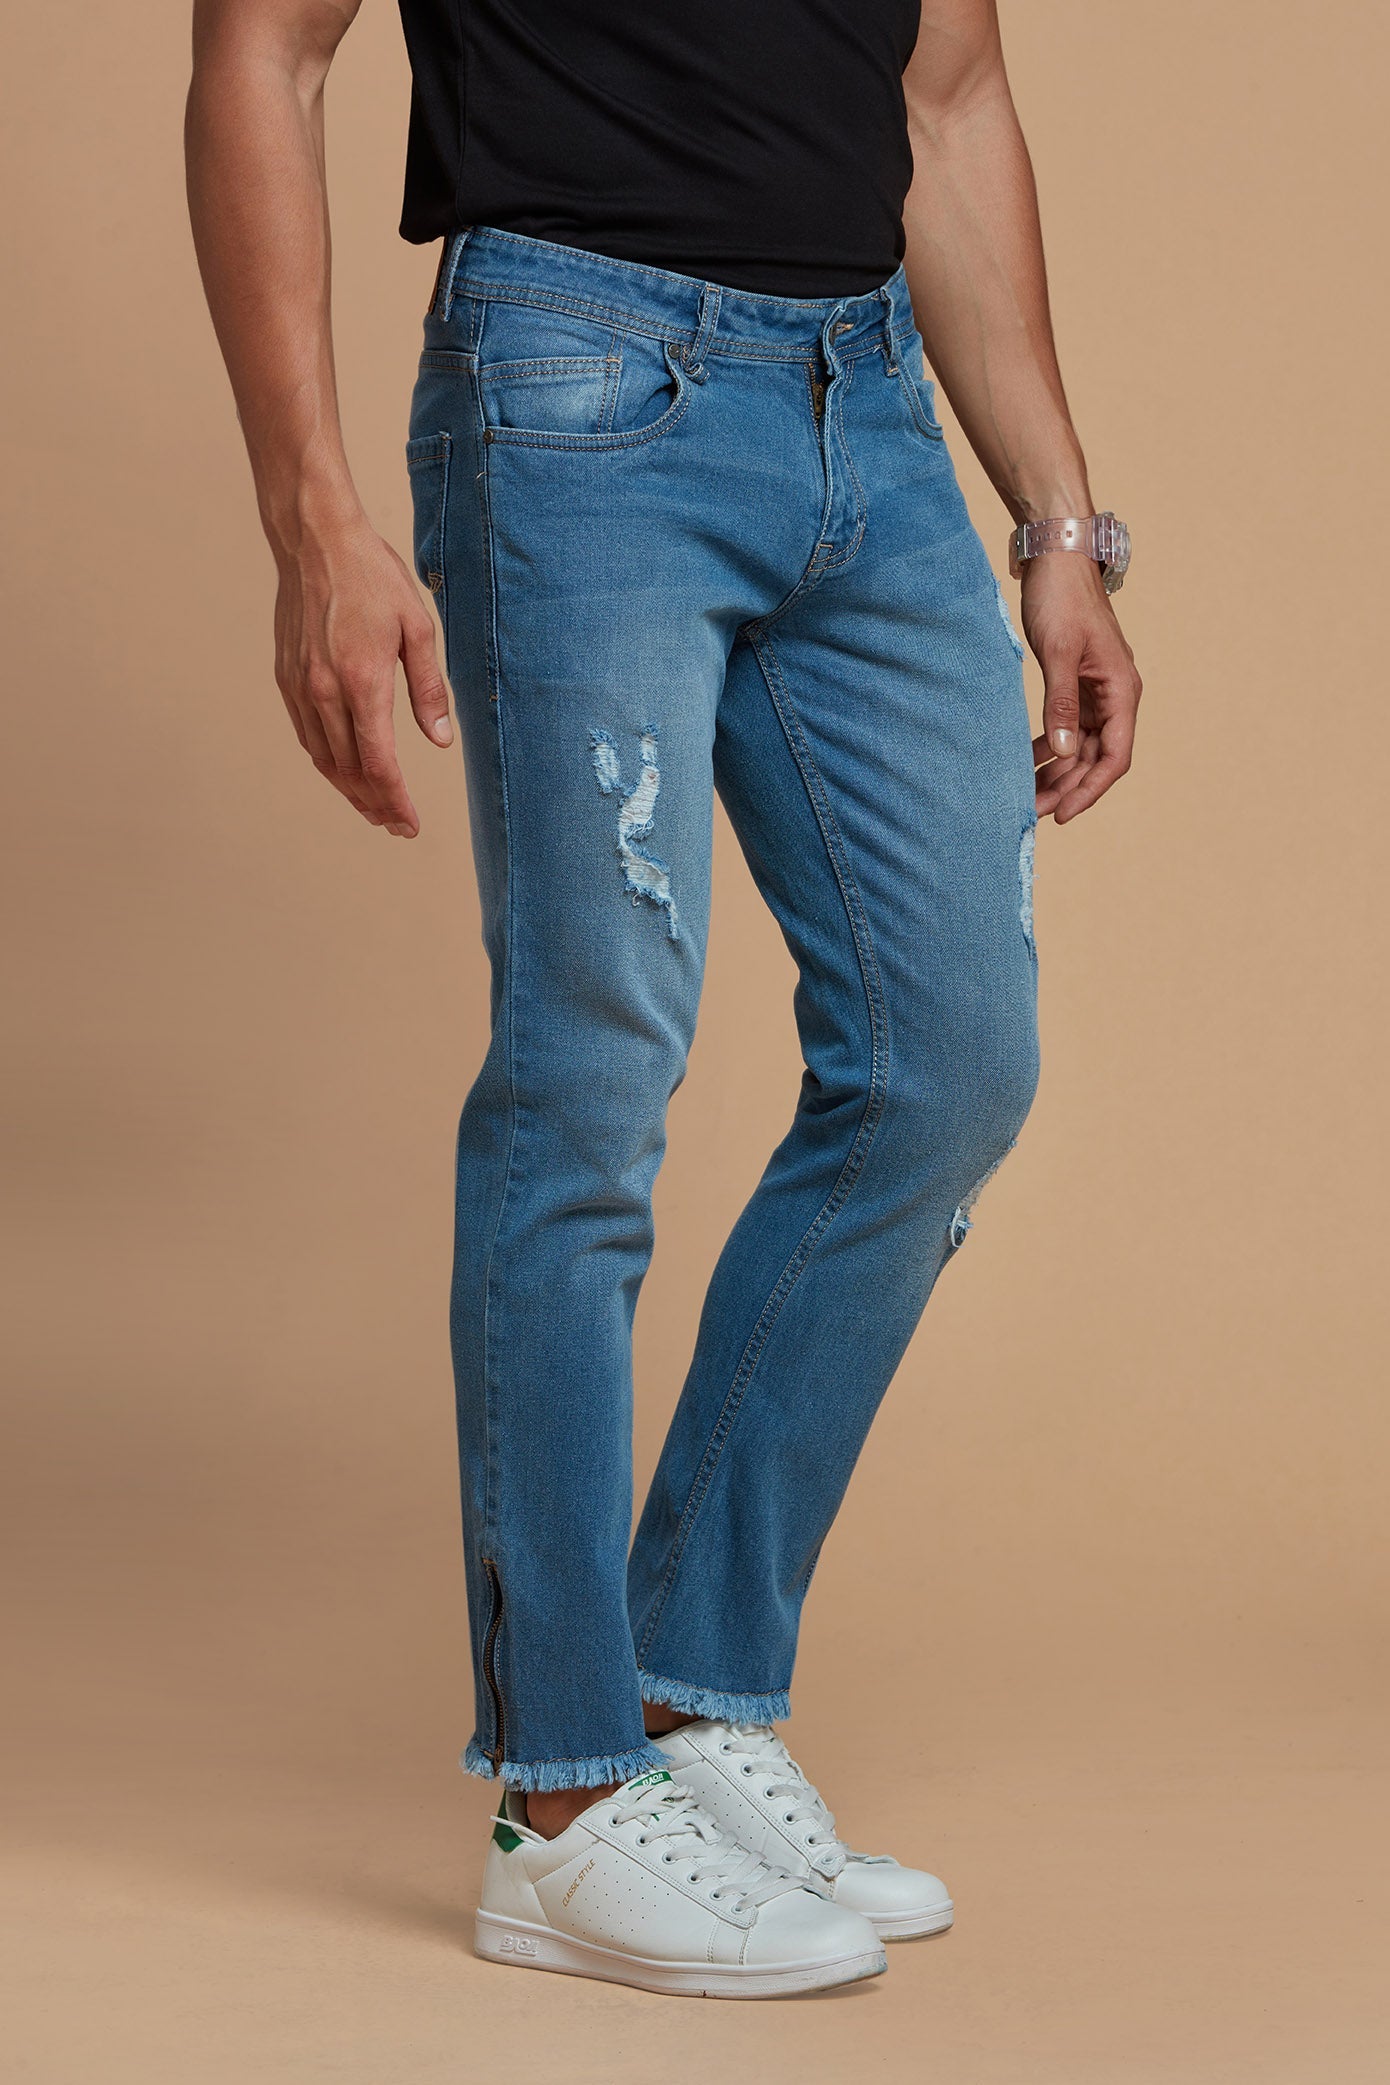 Buy Flying Machine Mid Rise MJ Mankle Slim Fit Jeans - NNNOW.com